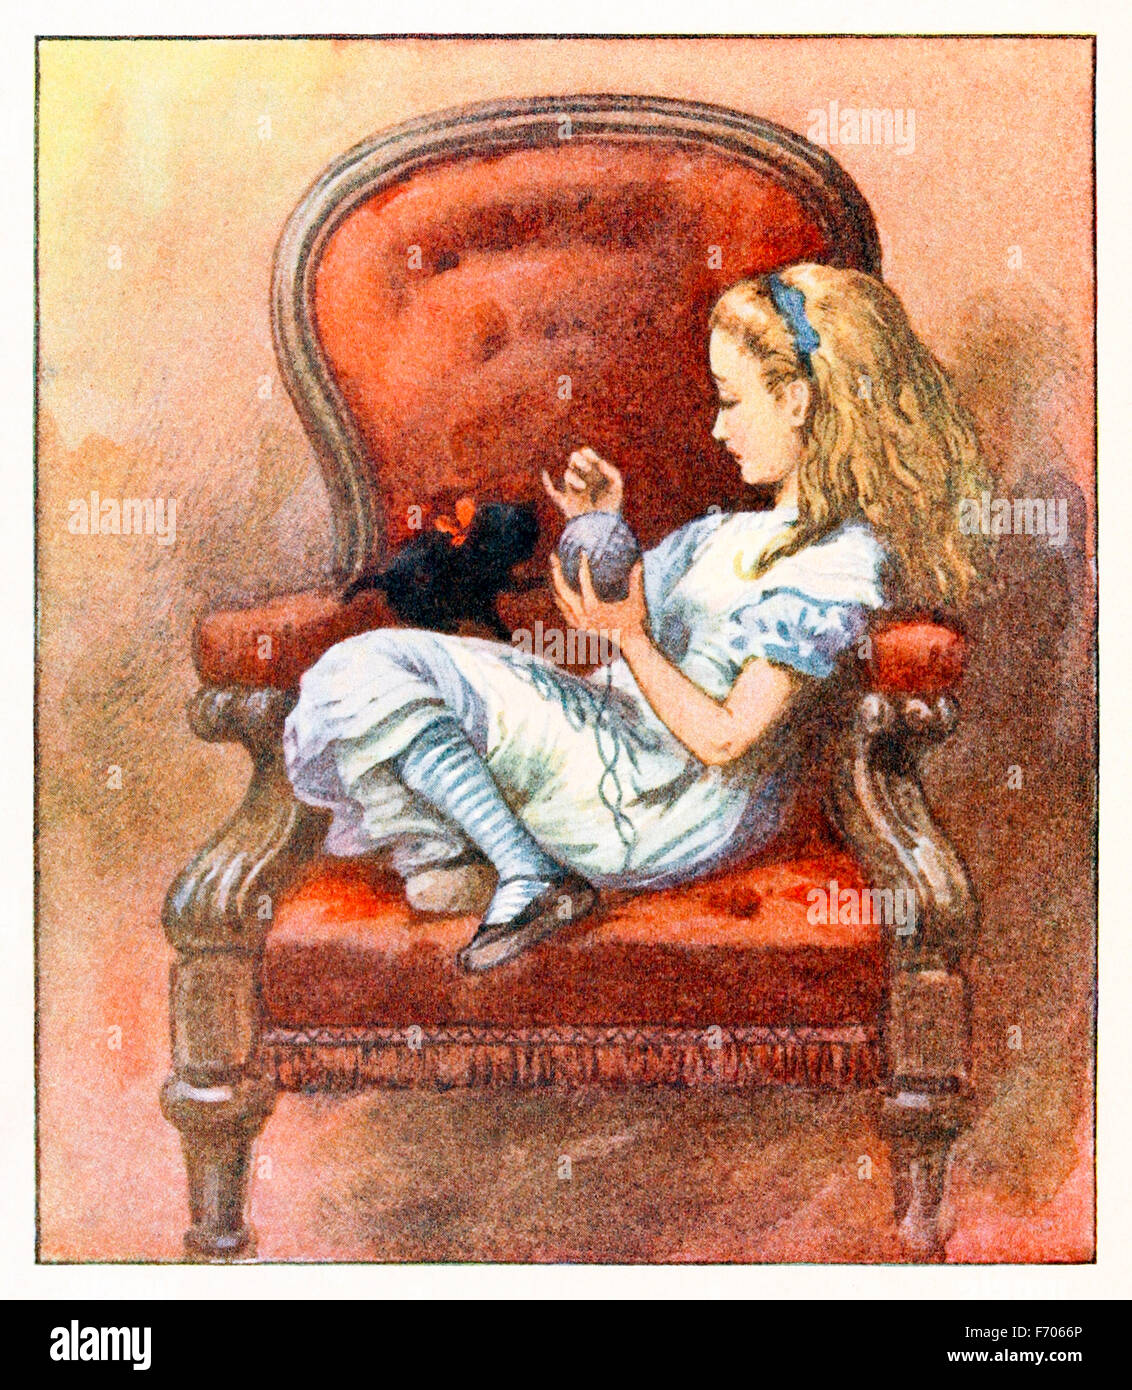 'Do you know, I was so angry with Kitty' from 'Through the Looking-Glass and What Alice Found There' by Lewis Carroll (1832-1898), illustrated by Sir John Tenniel. See description for more information. Stock Photo